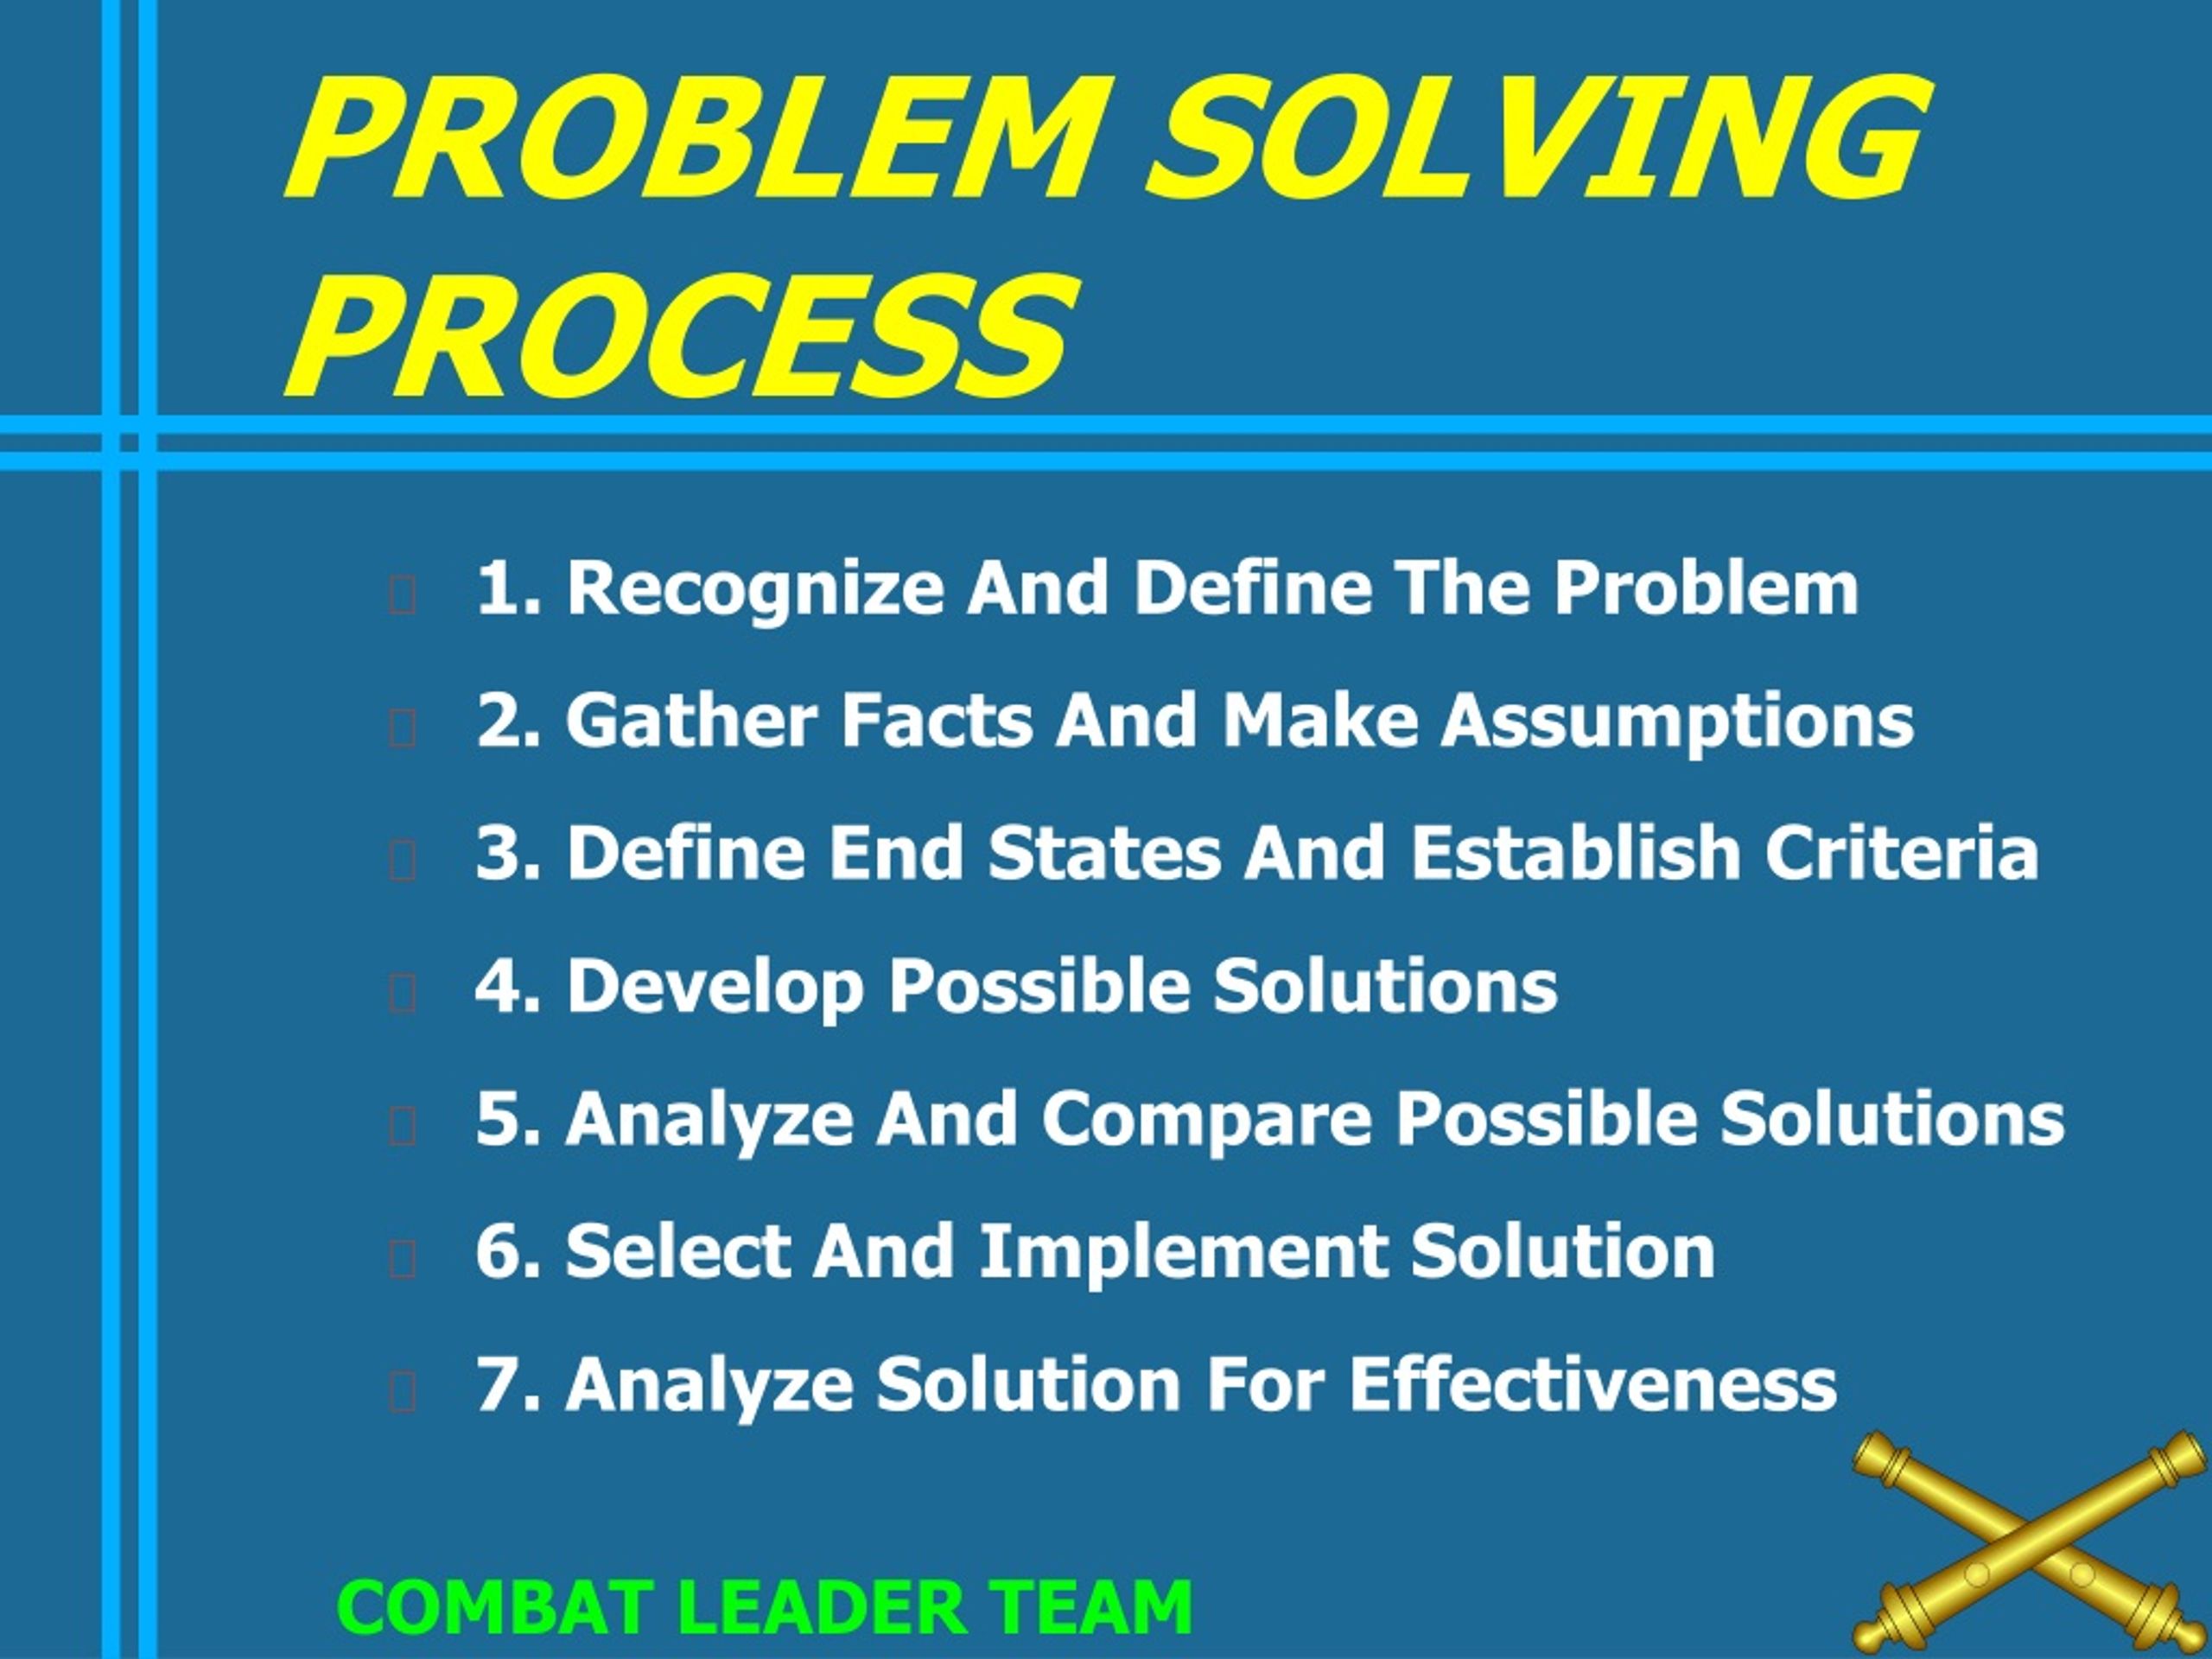 when gathering information during the army problem solving process